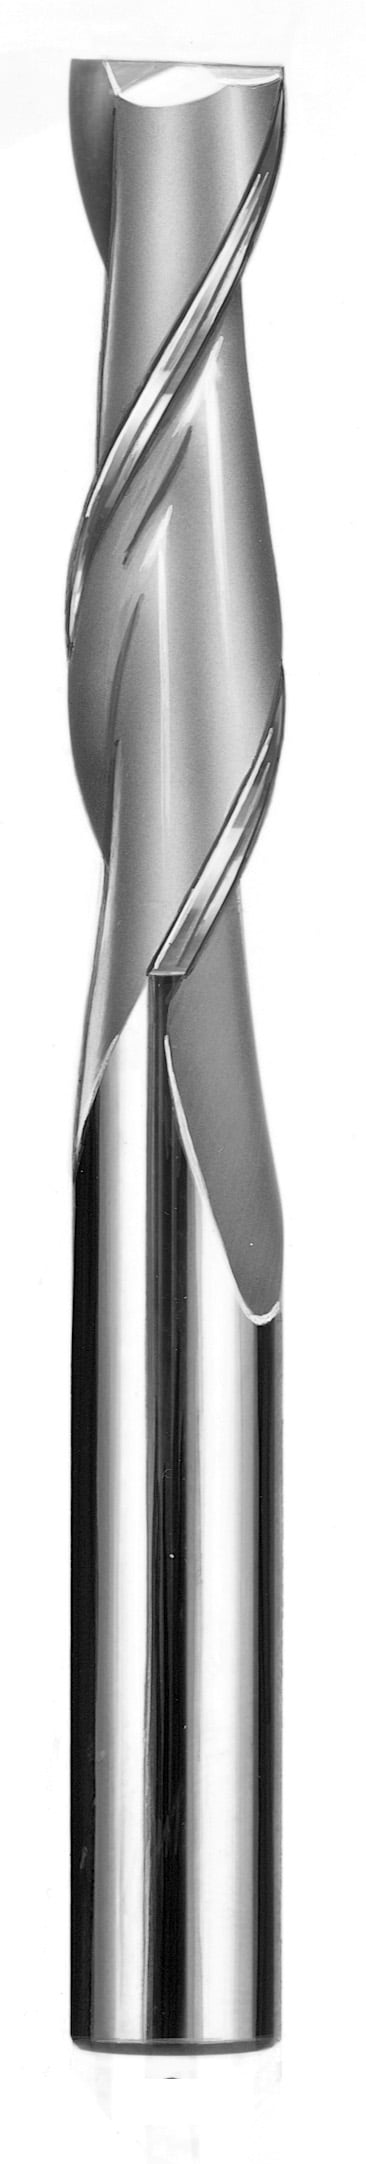 5/8" Dia, 2 Flute, Square End End Mill - 33313